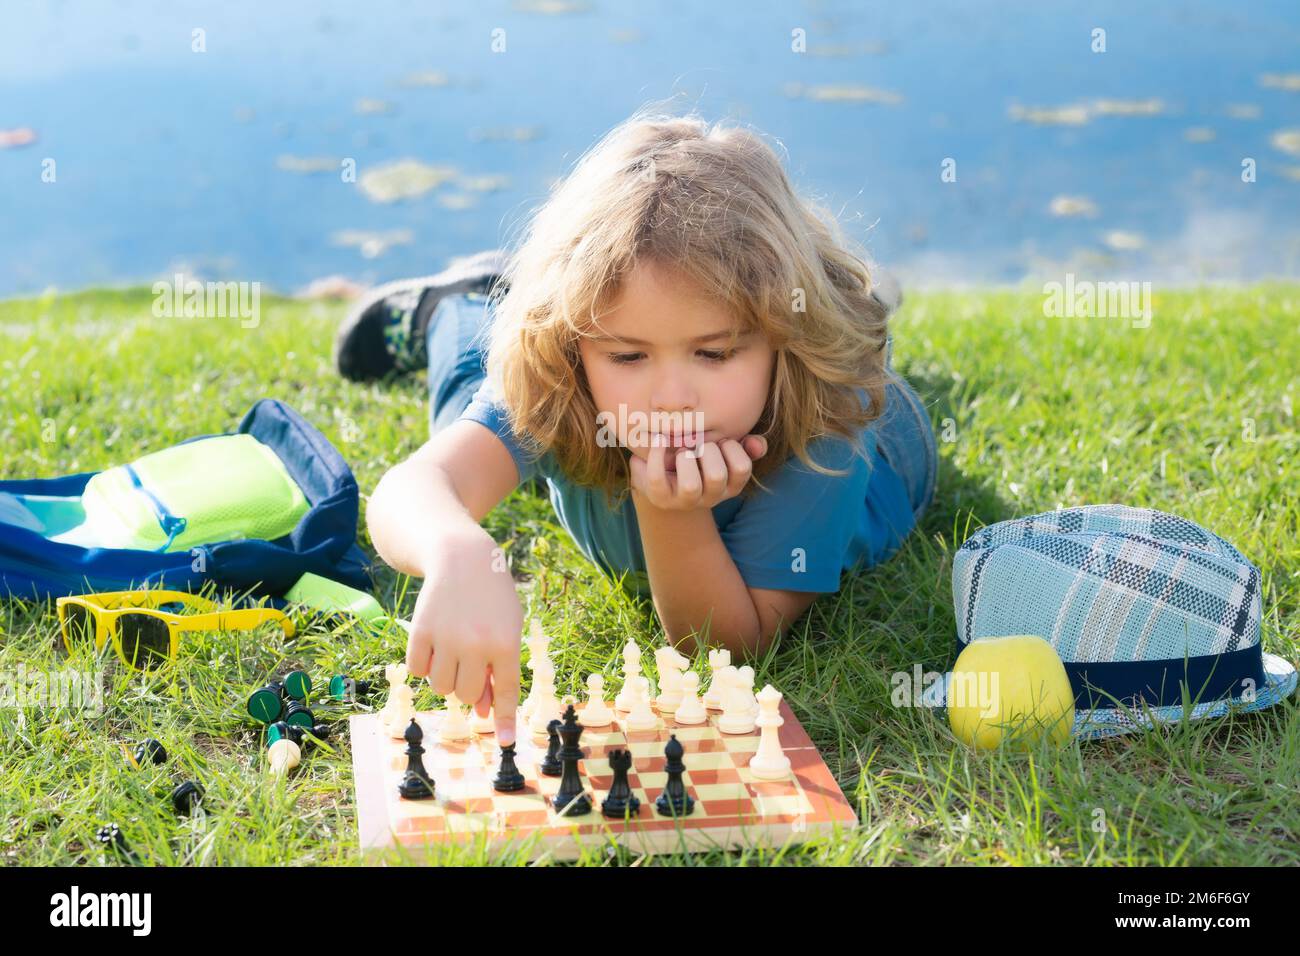 Little kid play chess in park. Child boy playing board game outdoor. Thinking child brainstorming and idea in chess game. Stock Photo